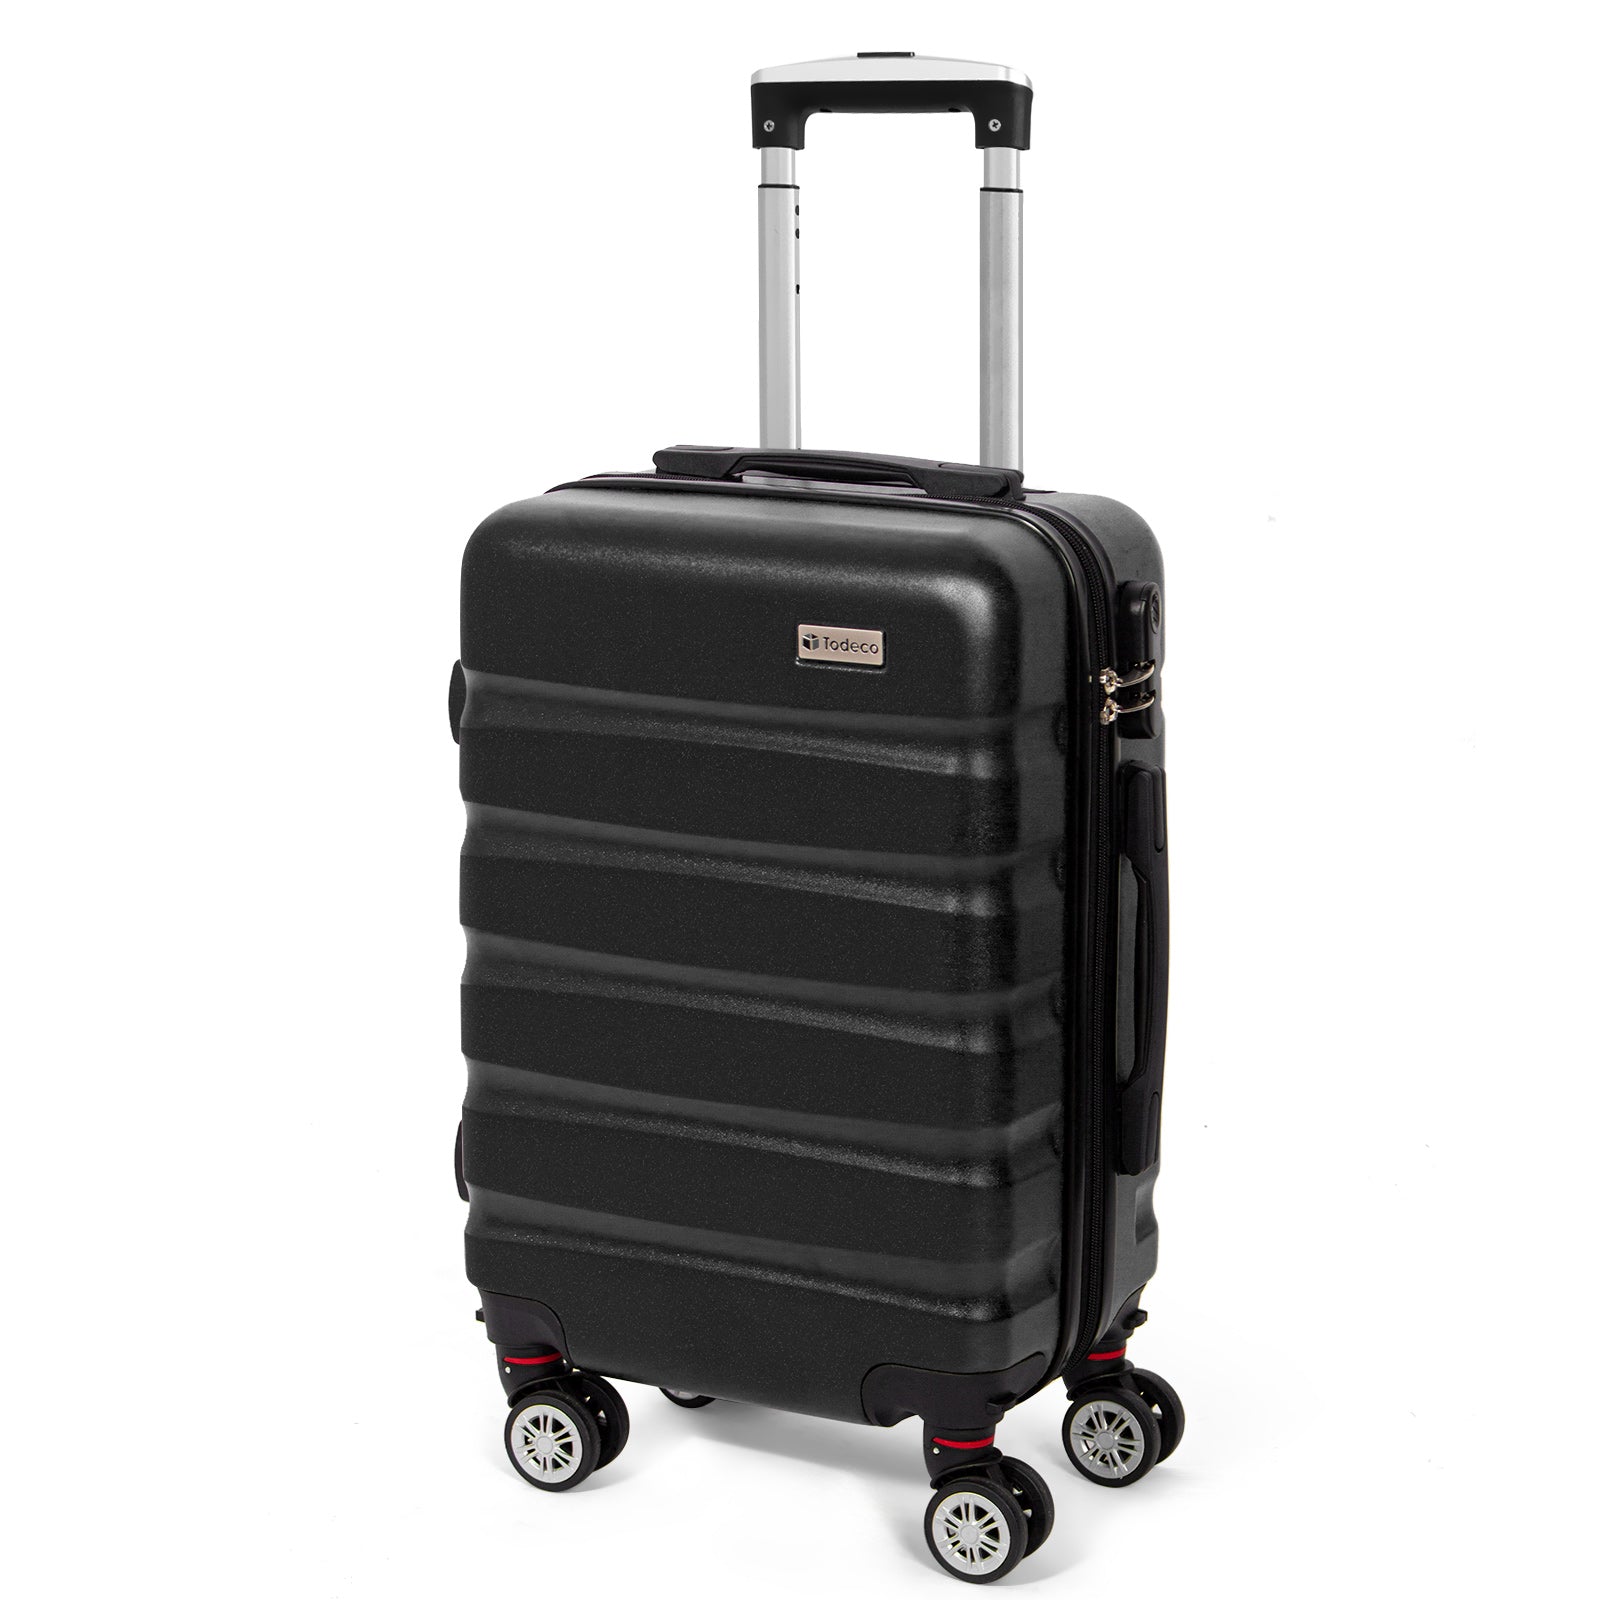 Todeco-Cabin-Suitcase-56cm-Rigid-and-Lightweight-ABS-PC-Lightweight-Carry-on-Suitcase-with-Hard-Shell-Travel-Suitcase-with-4-Double-Wheels-56x36x22cm-Black